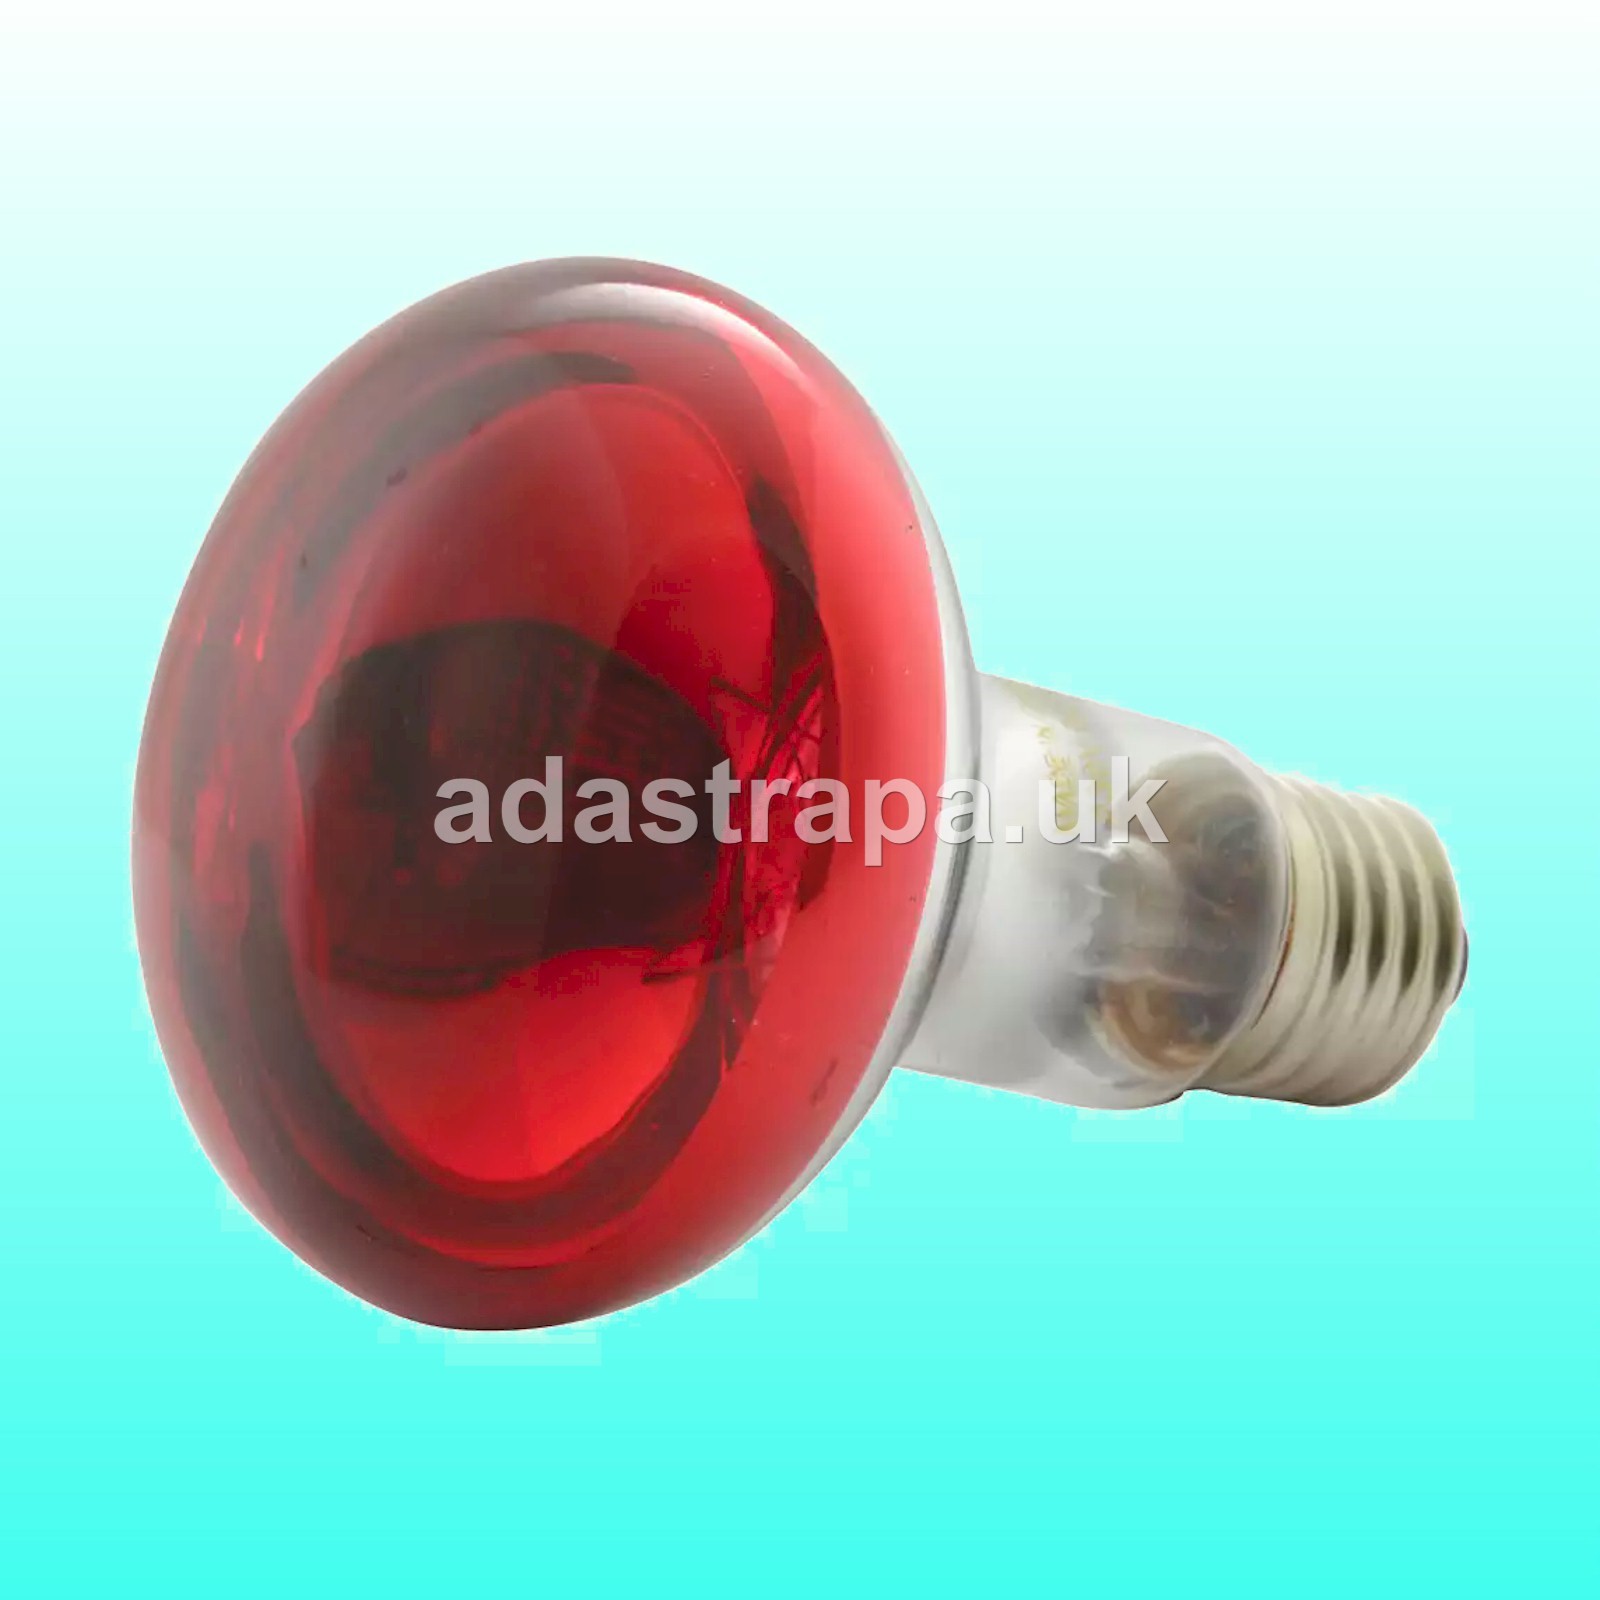 QTX R80-R R80 Reflector Lamp E27 Red - 160.002UK